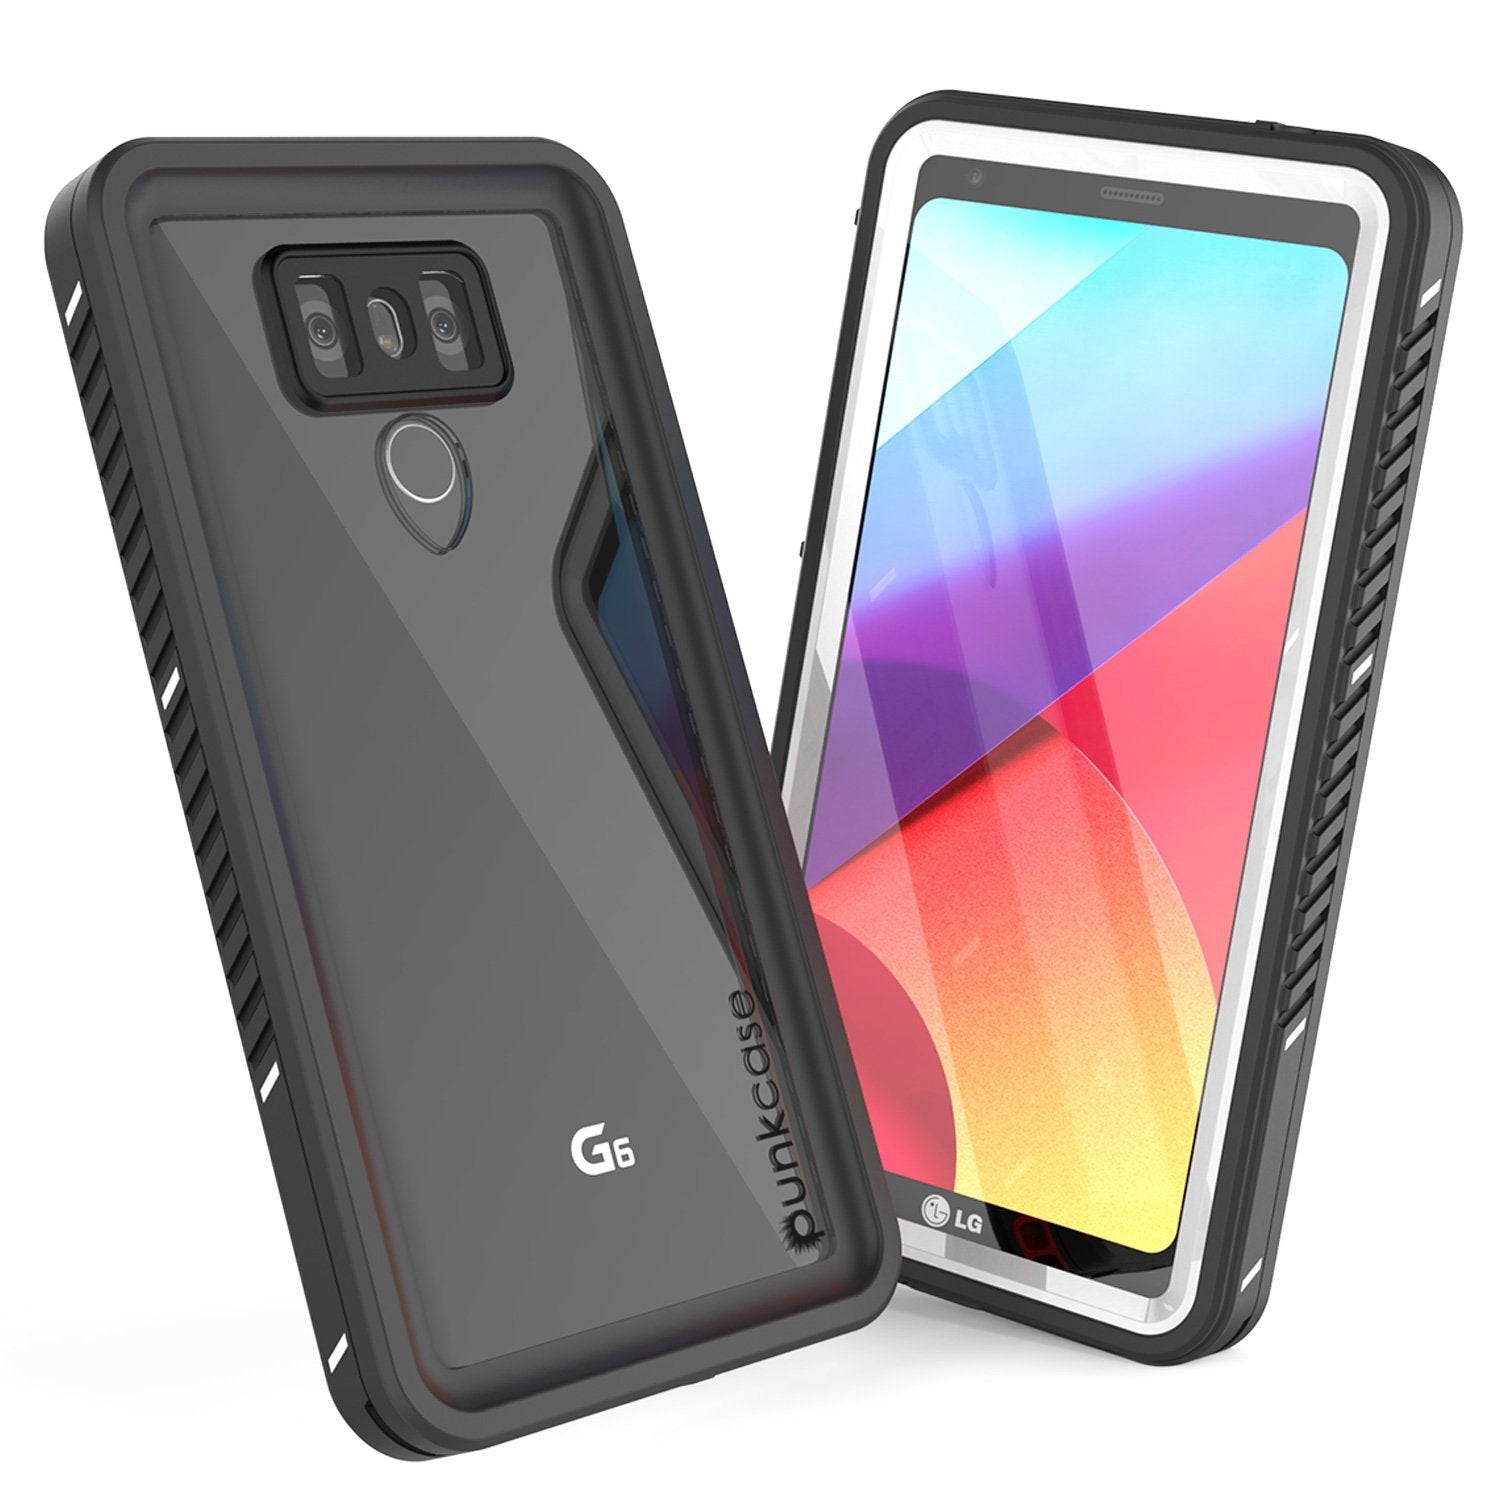 LG G6 Waterproof Case, Punkcase [Extreme Series] [Slim Fit] [IP68 Certified] [Shockproof] [Snowproof] [Dirproof] Armor Cover W/ Built In Screen Protector for LG G6 [WHITE] - PunkCase NZ